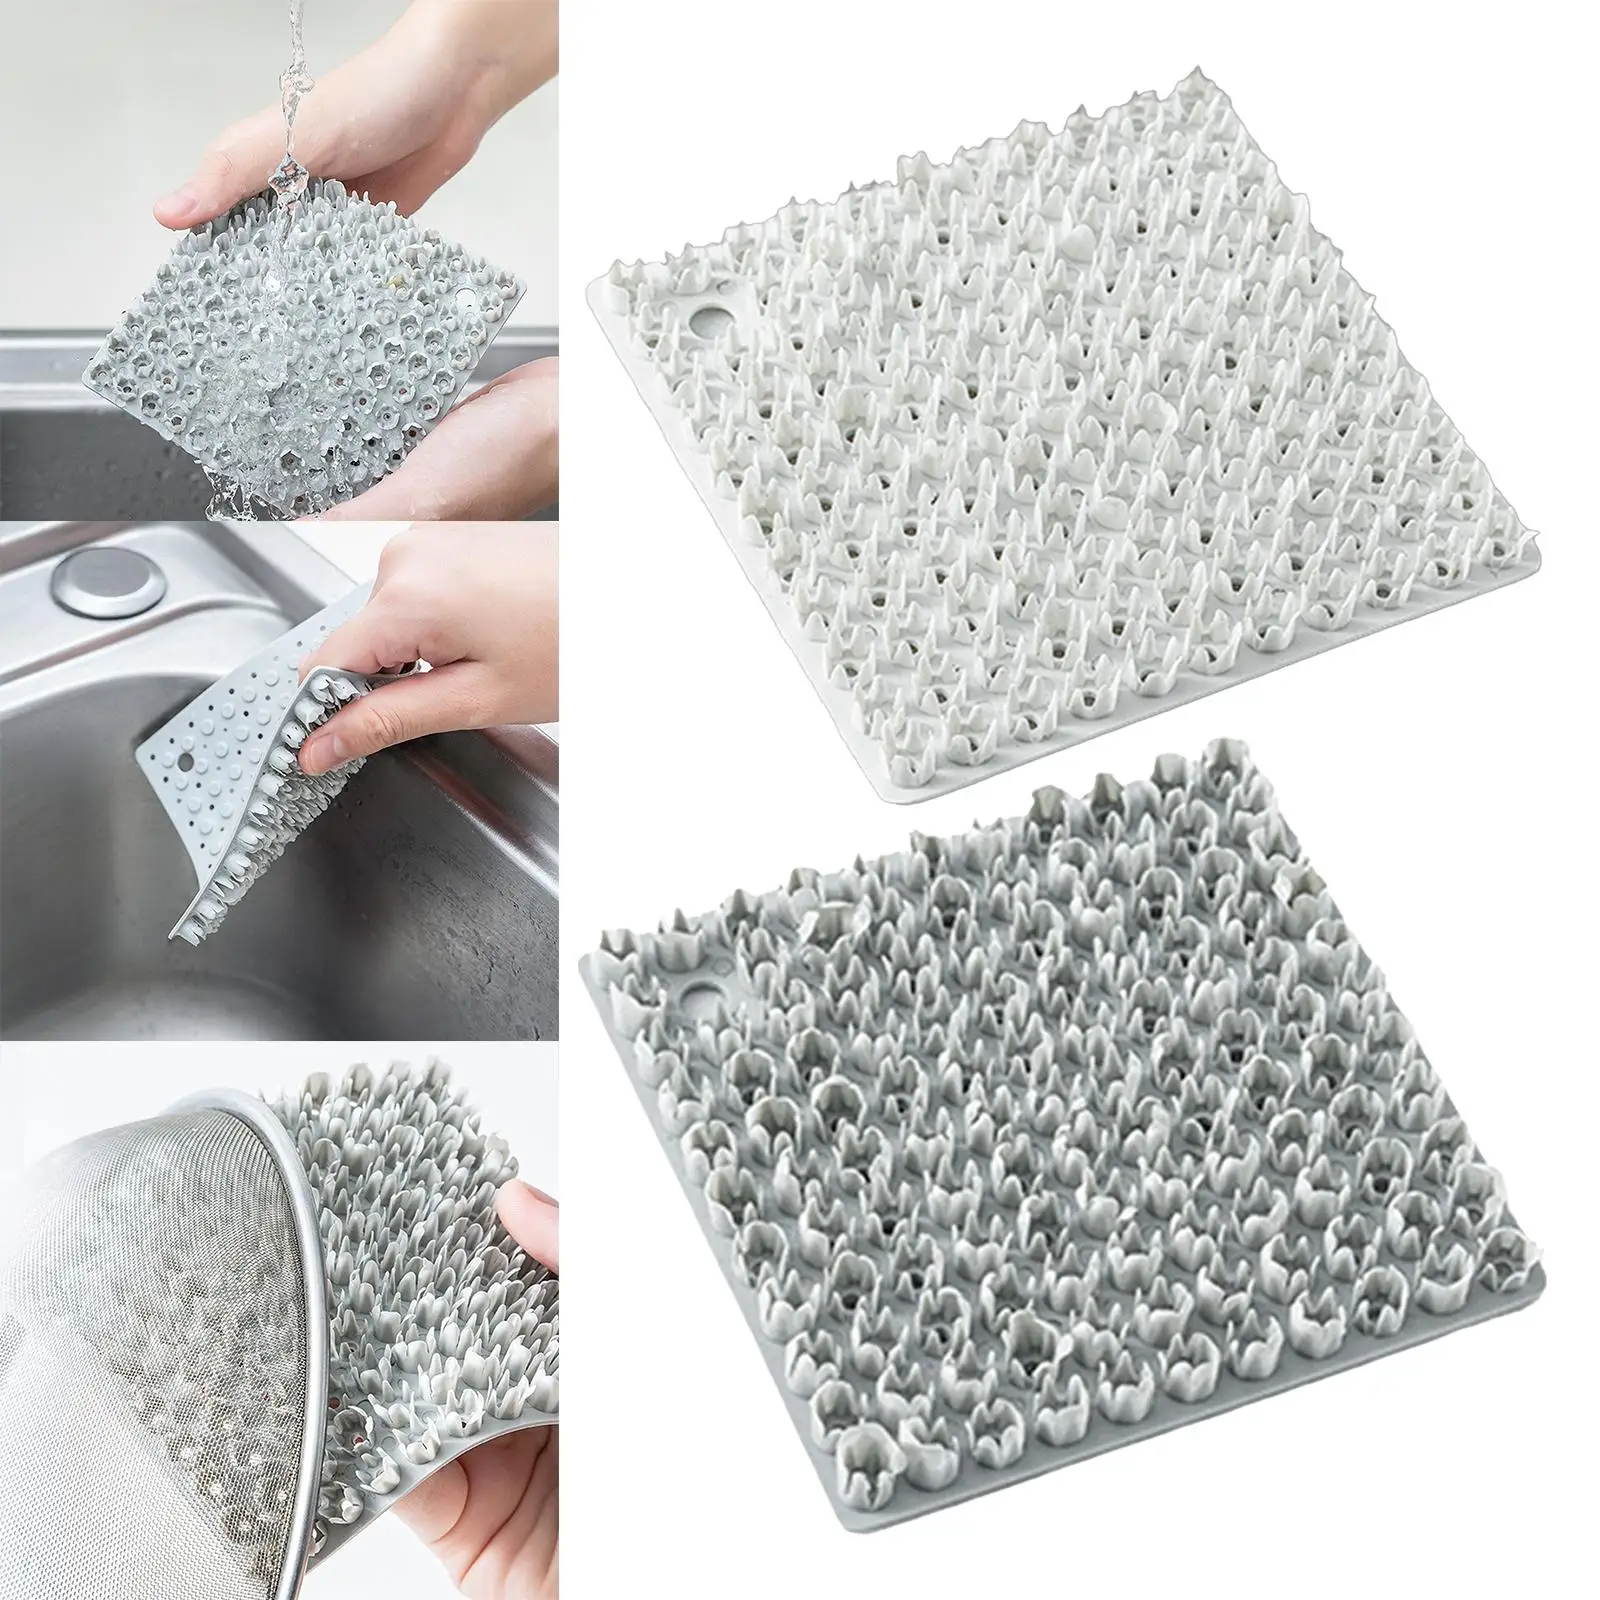 Multi Function Vegetable Fruit Brush Kitchen Accessories Insulation Pads Accessoies Supply Tool for Pot Bathroom Sink Dishes Pan